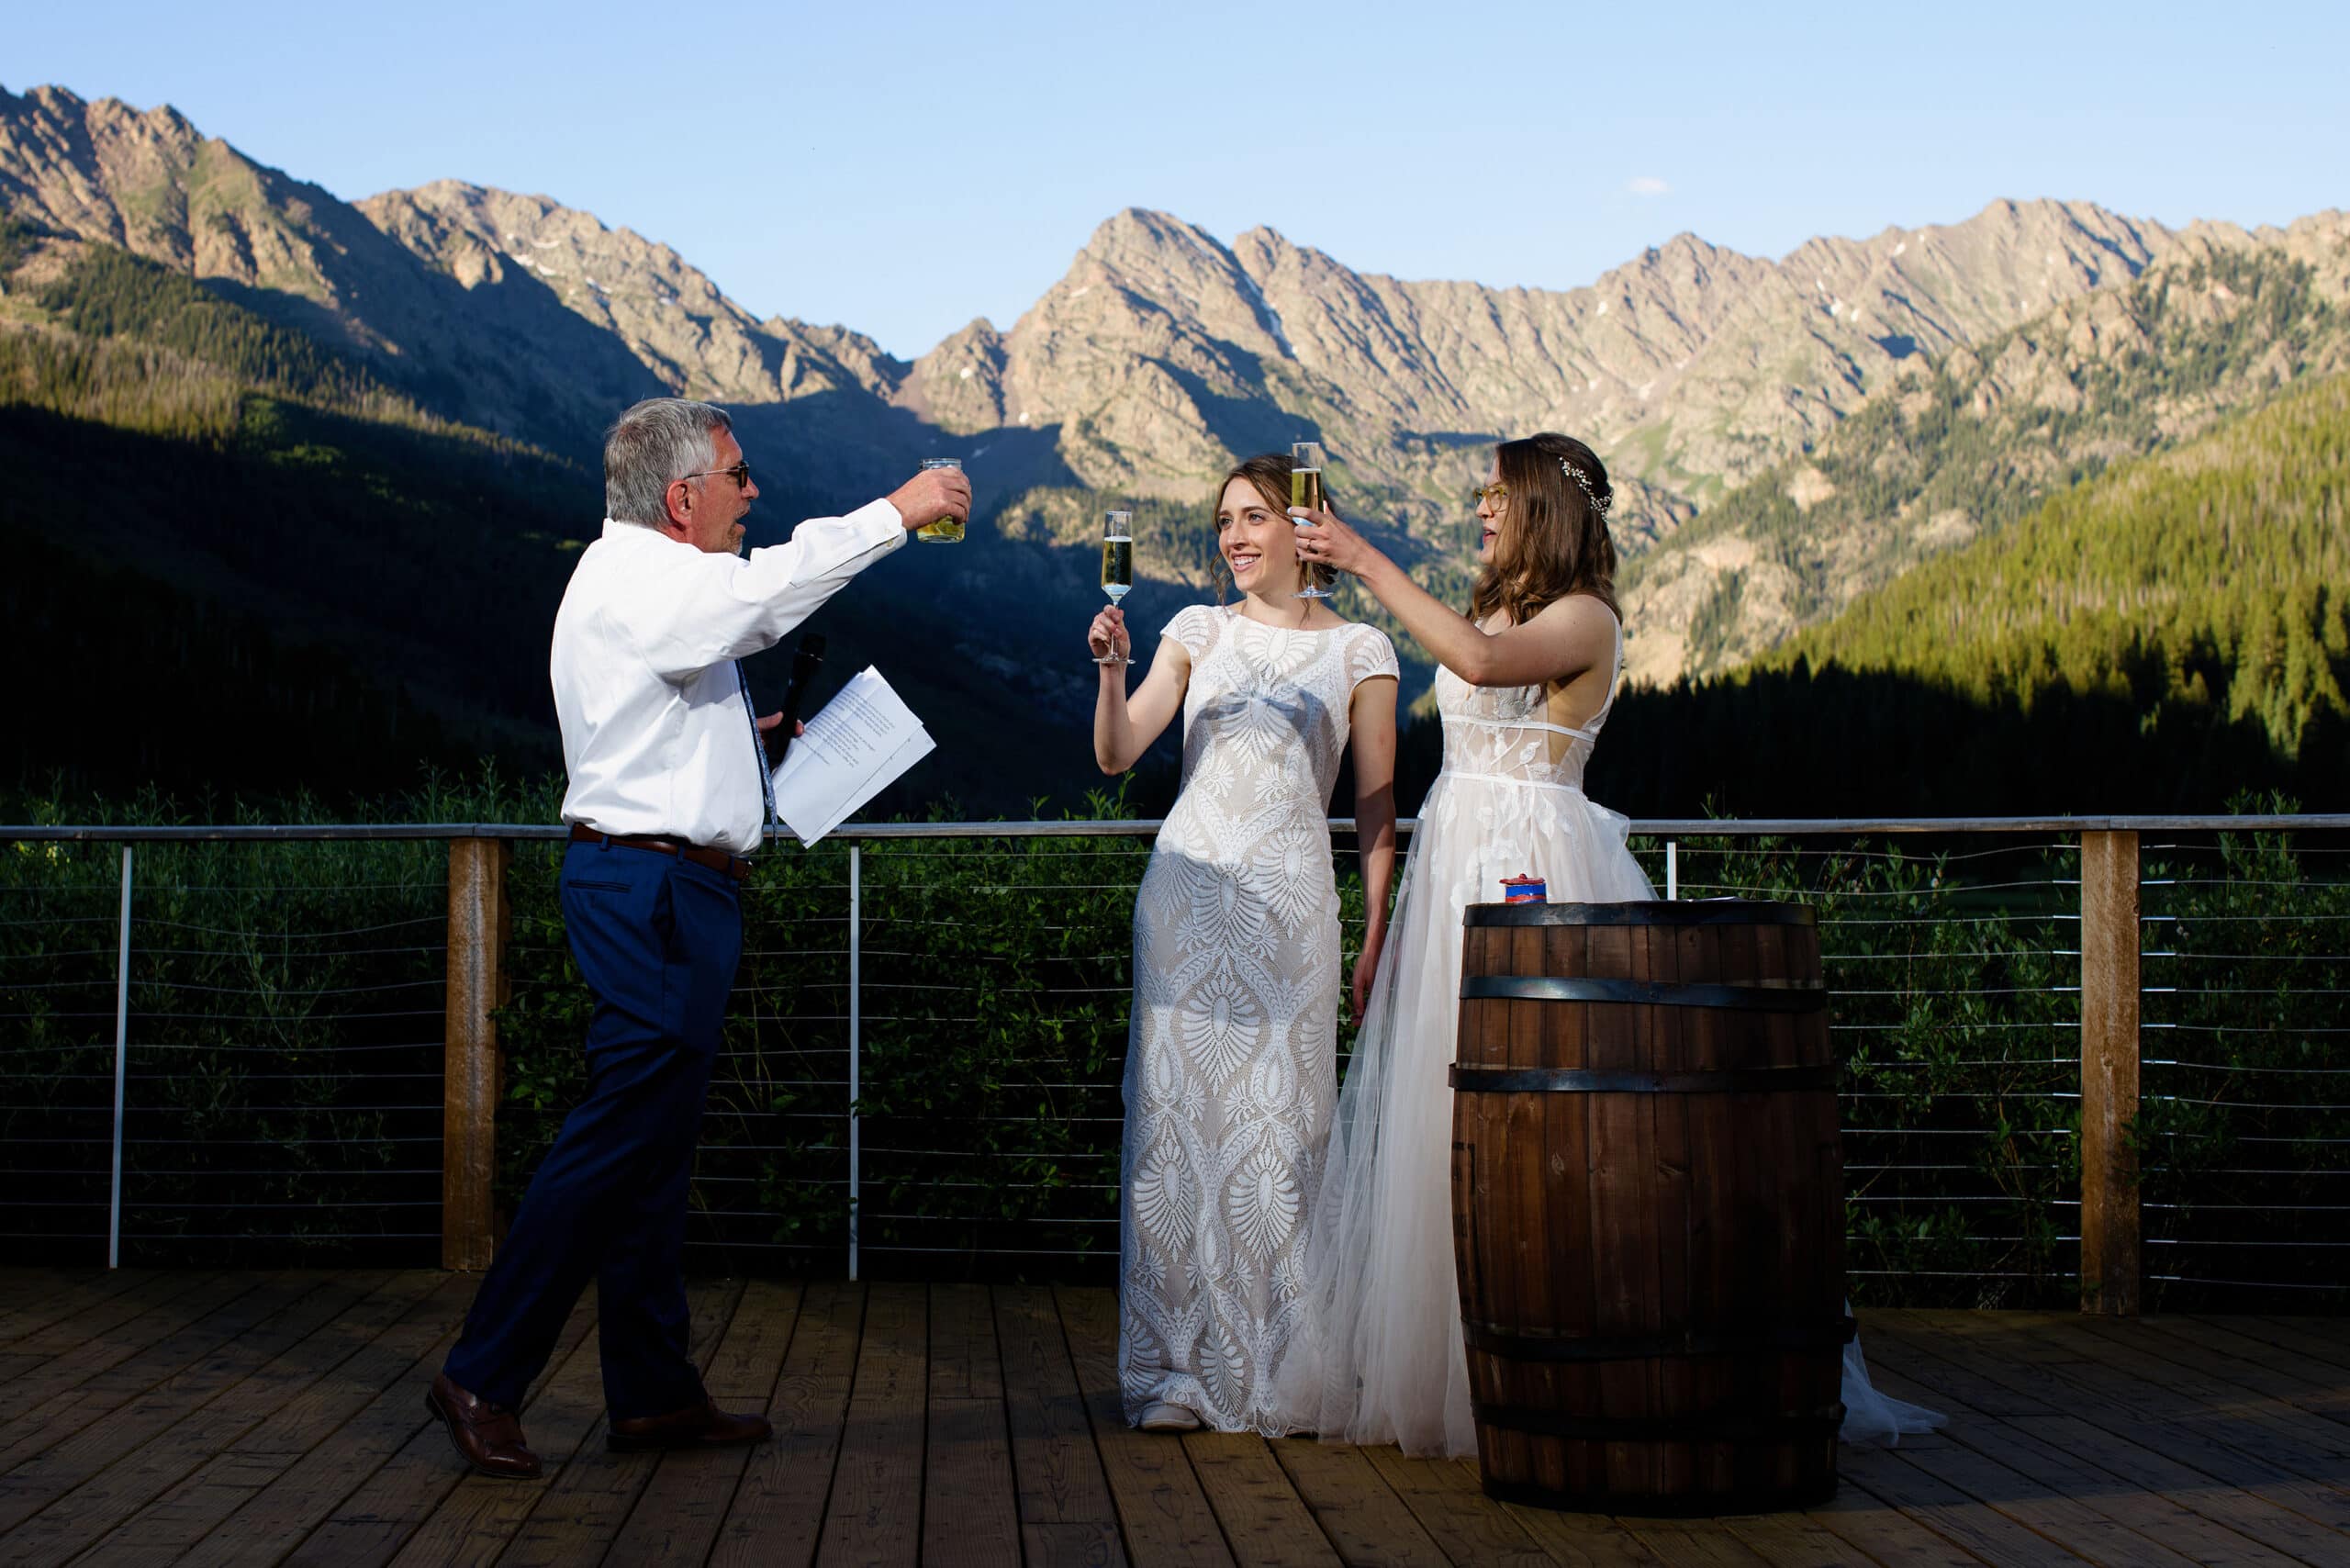 Father of the bride toasts the couple at Piney River Ranch during their wedding reception